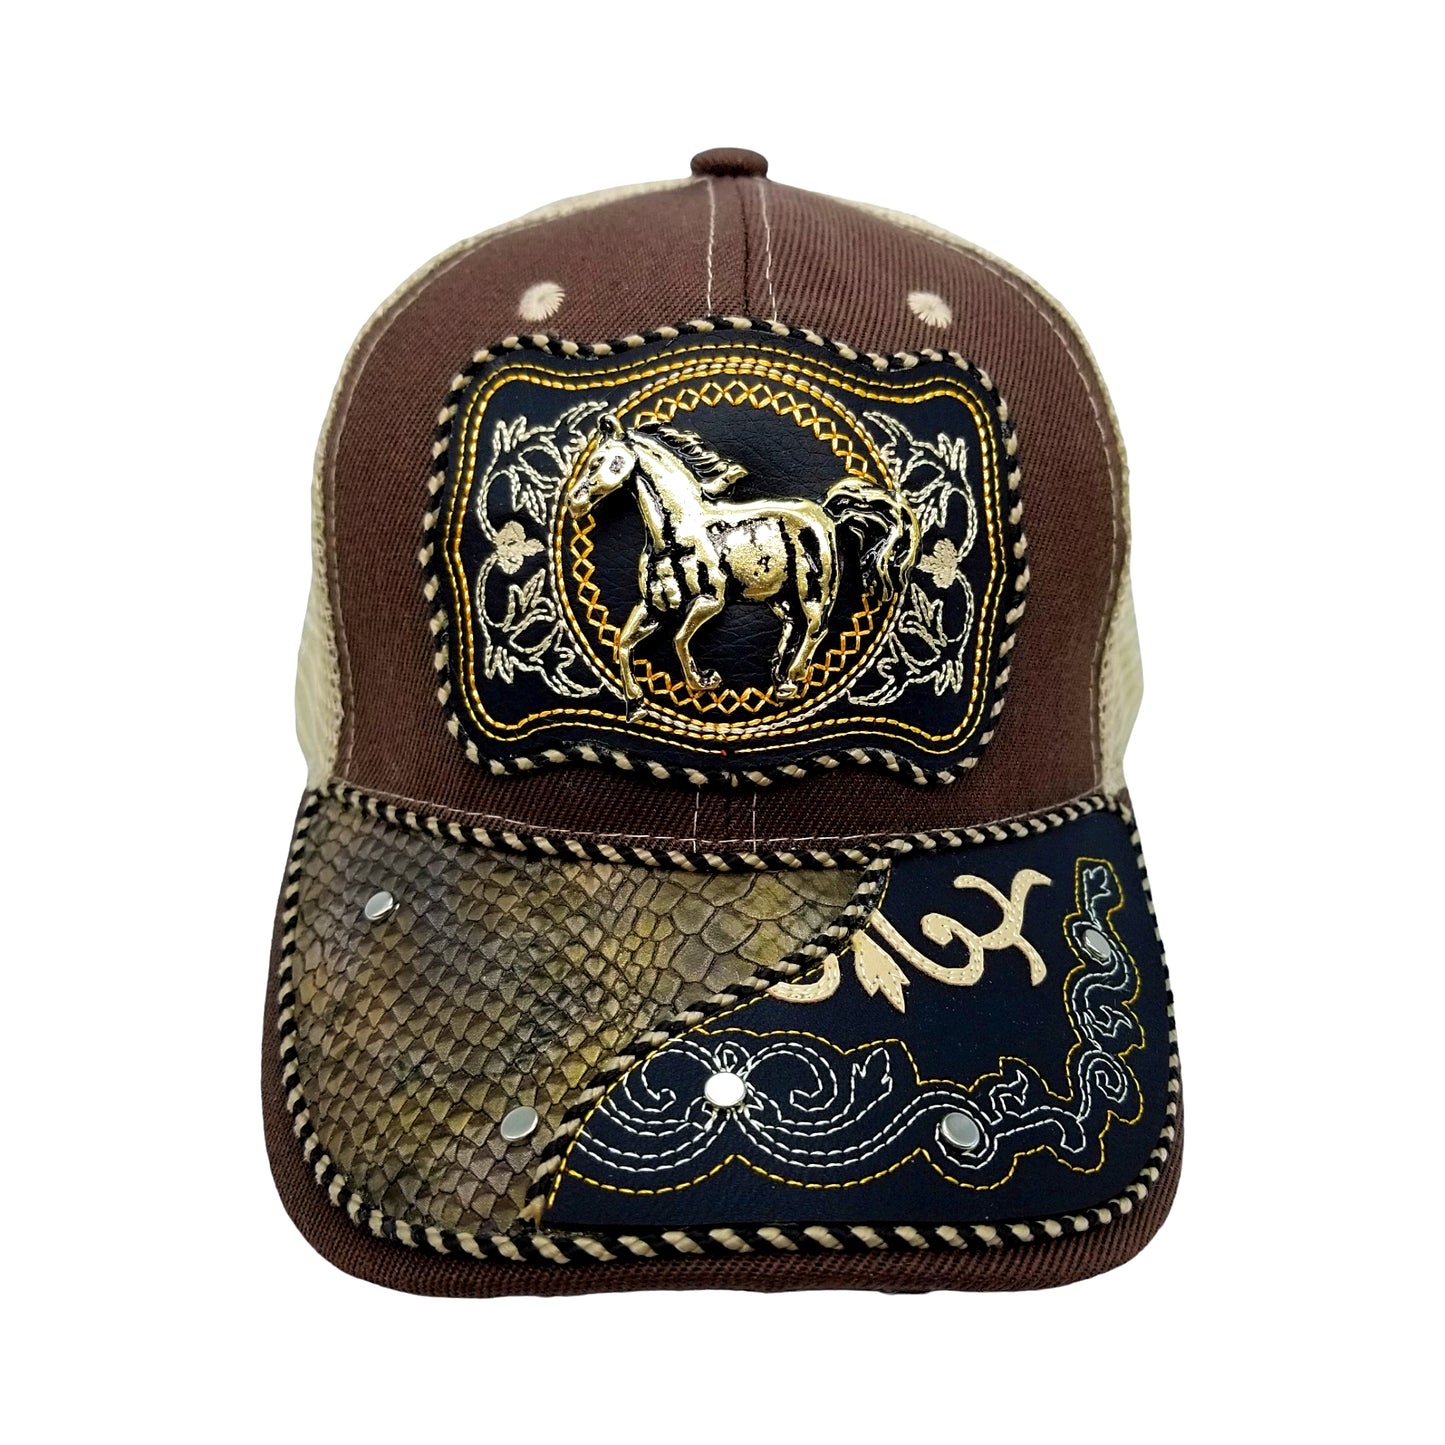 CASQUETTE - COUNTRY URBAIN - 6 - CHEVAL MUSTANG - TERRA ET BLANCHE